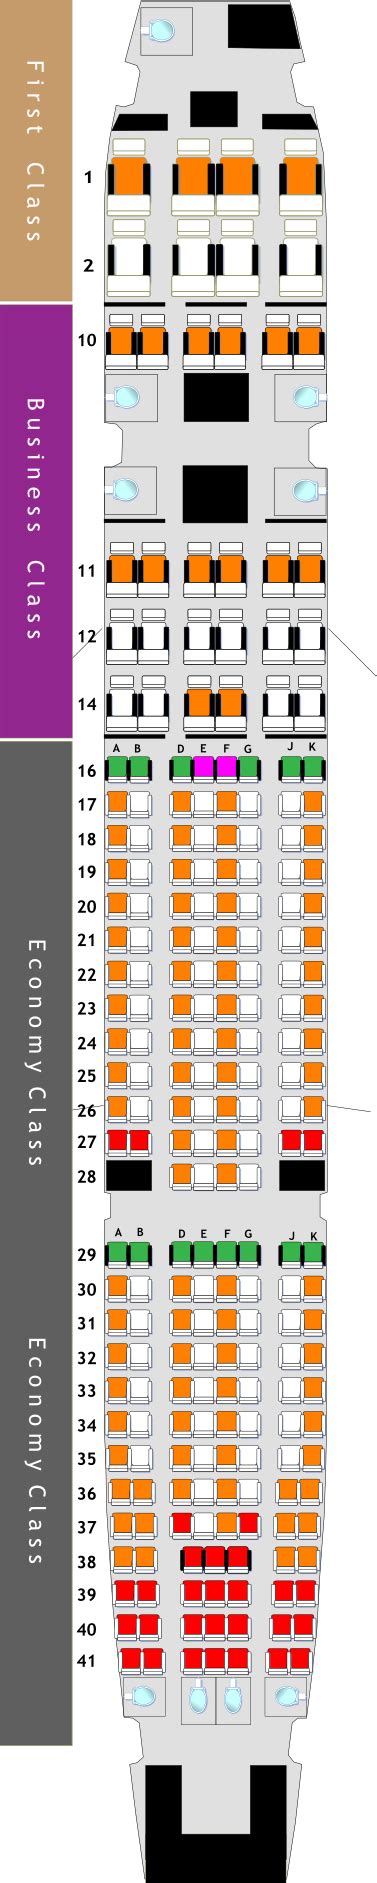 Airbus A330 Seat Map Cabinets Matttroy